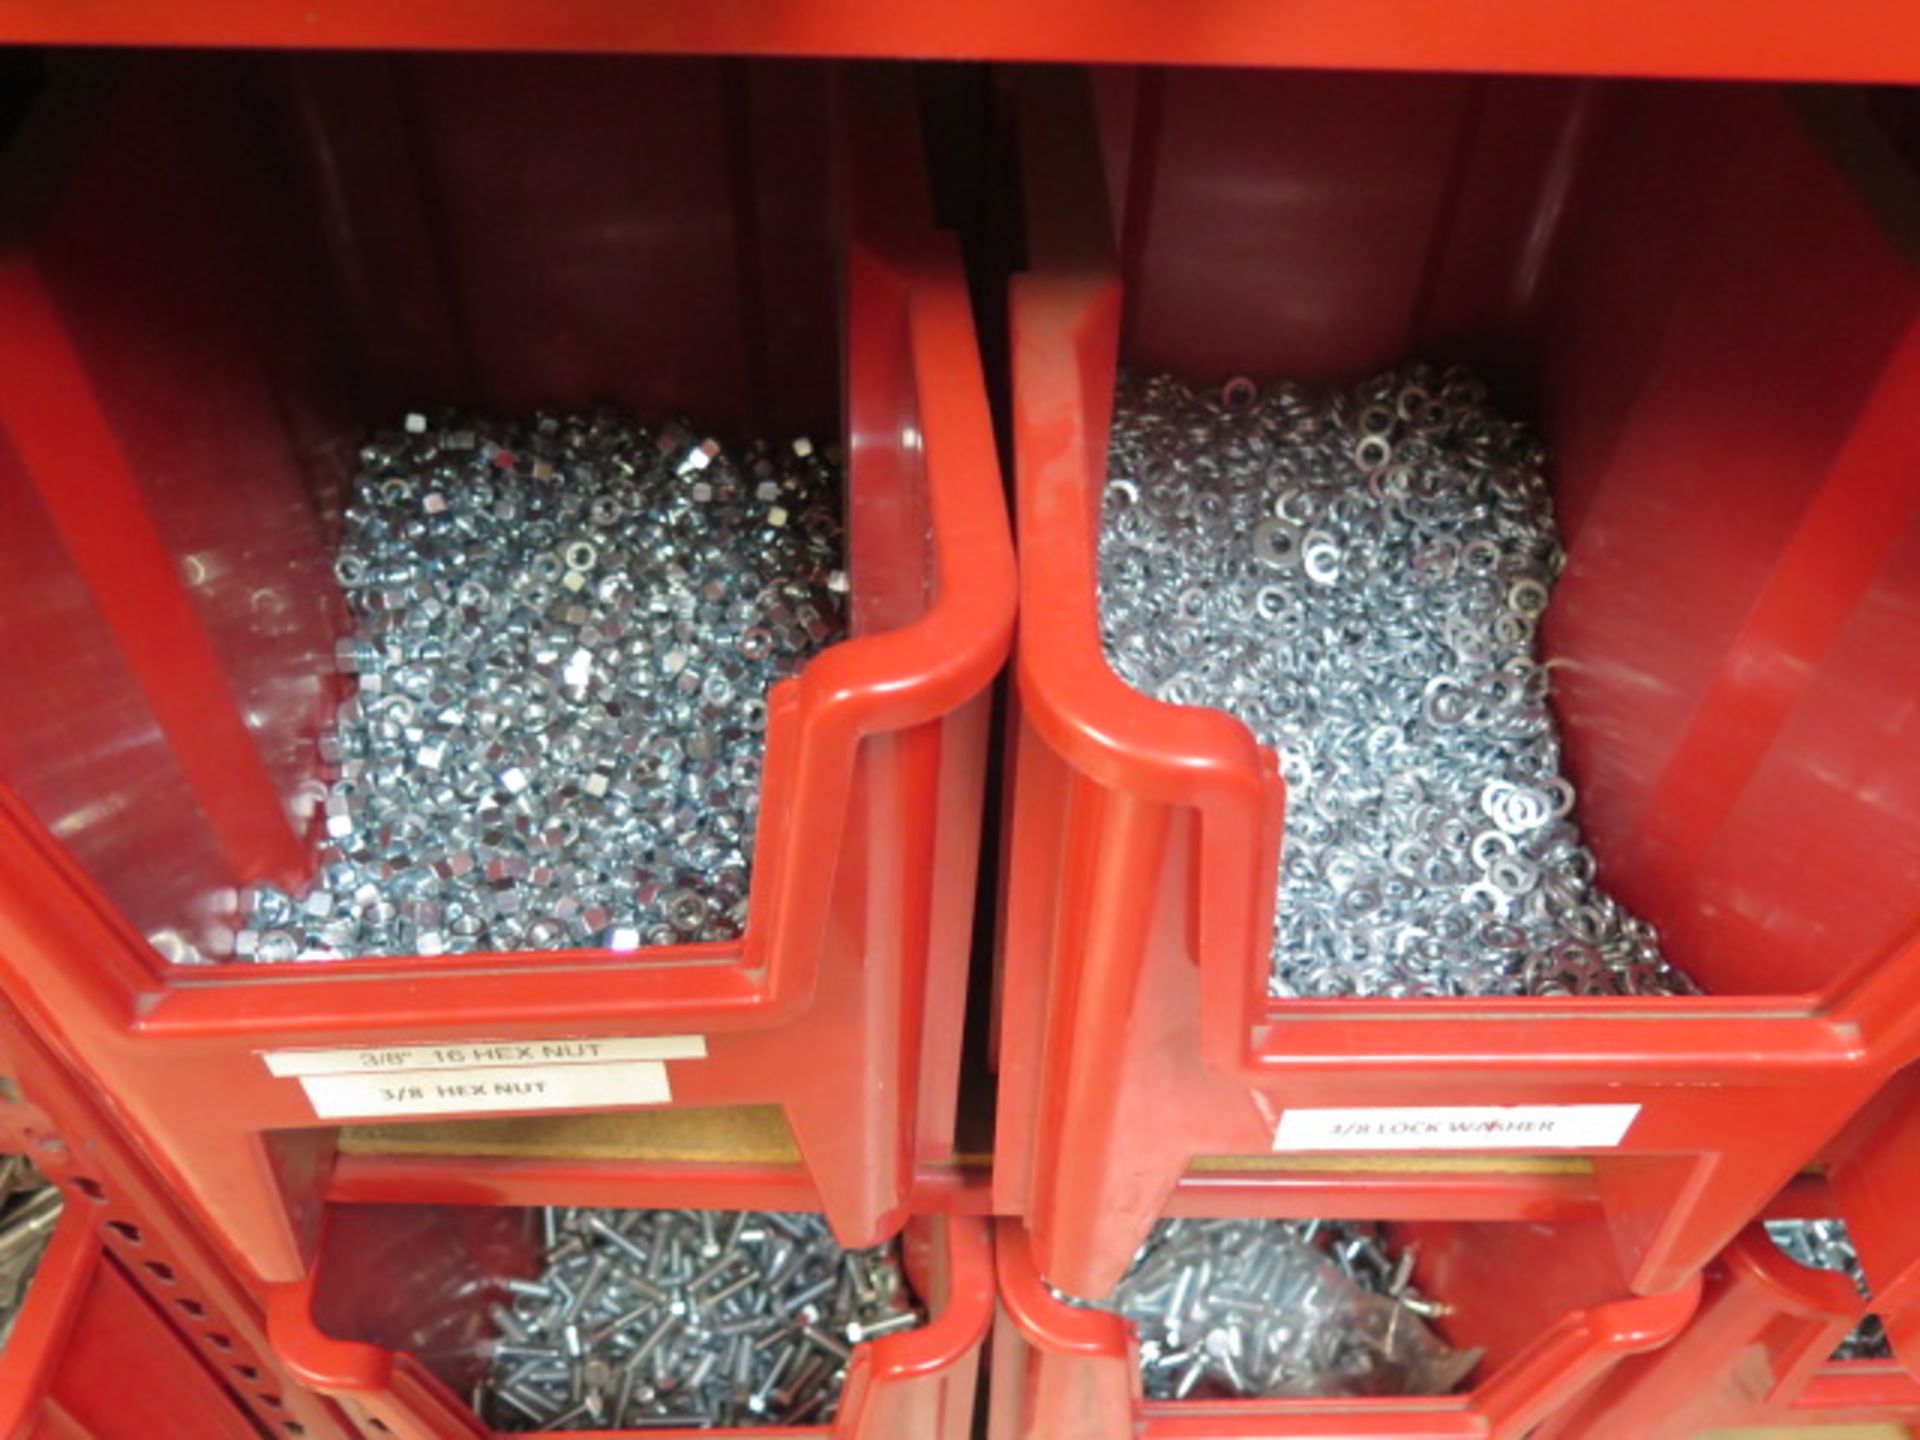 Large Quantity of Stainless Steel, Zink, Nylon Hardware and Anchor Bolts w/ Storage Bins and - Image 13 of 13